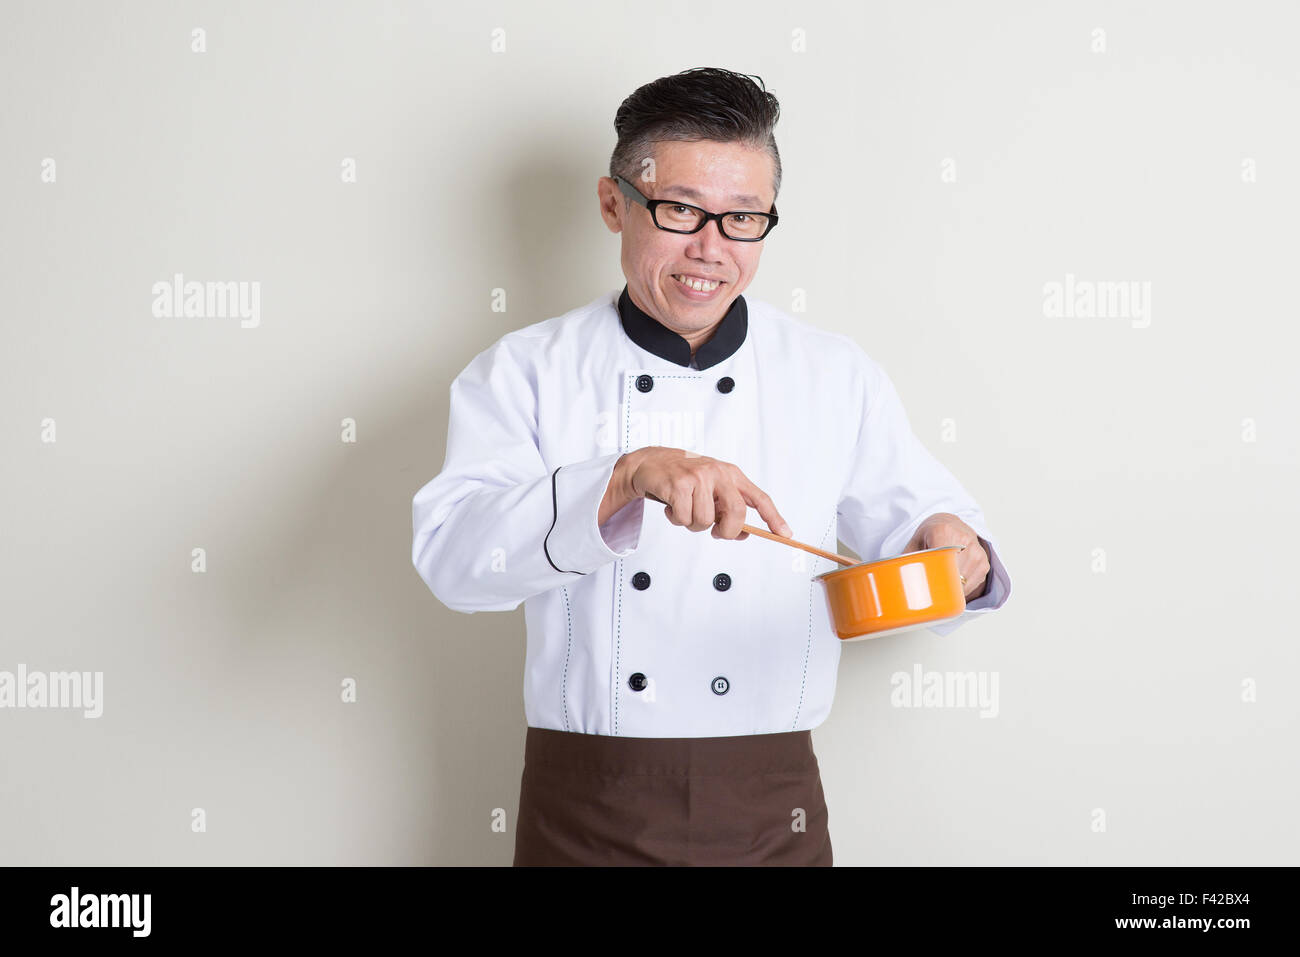 Portrait of mature Asian male chef in uniform cooking food, standing on plain background with shadow, copy space on side. Stock Photo